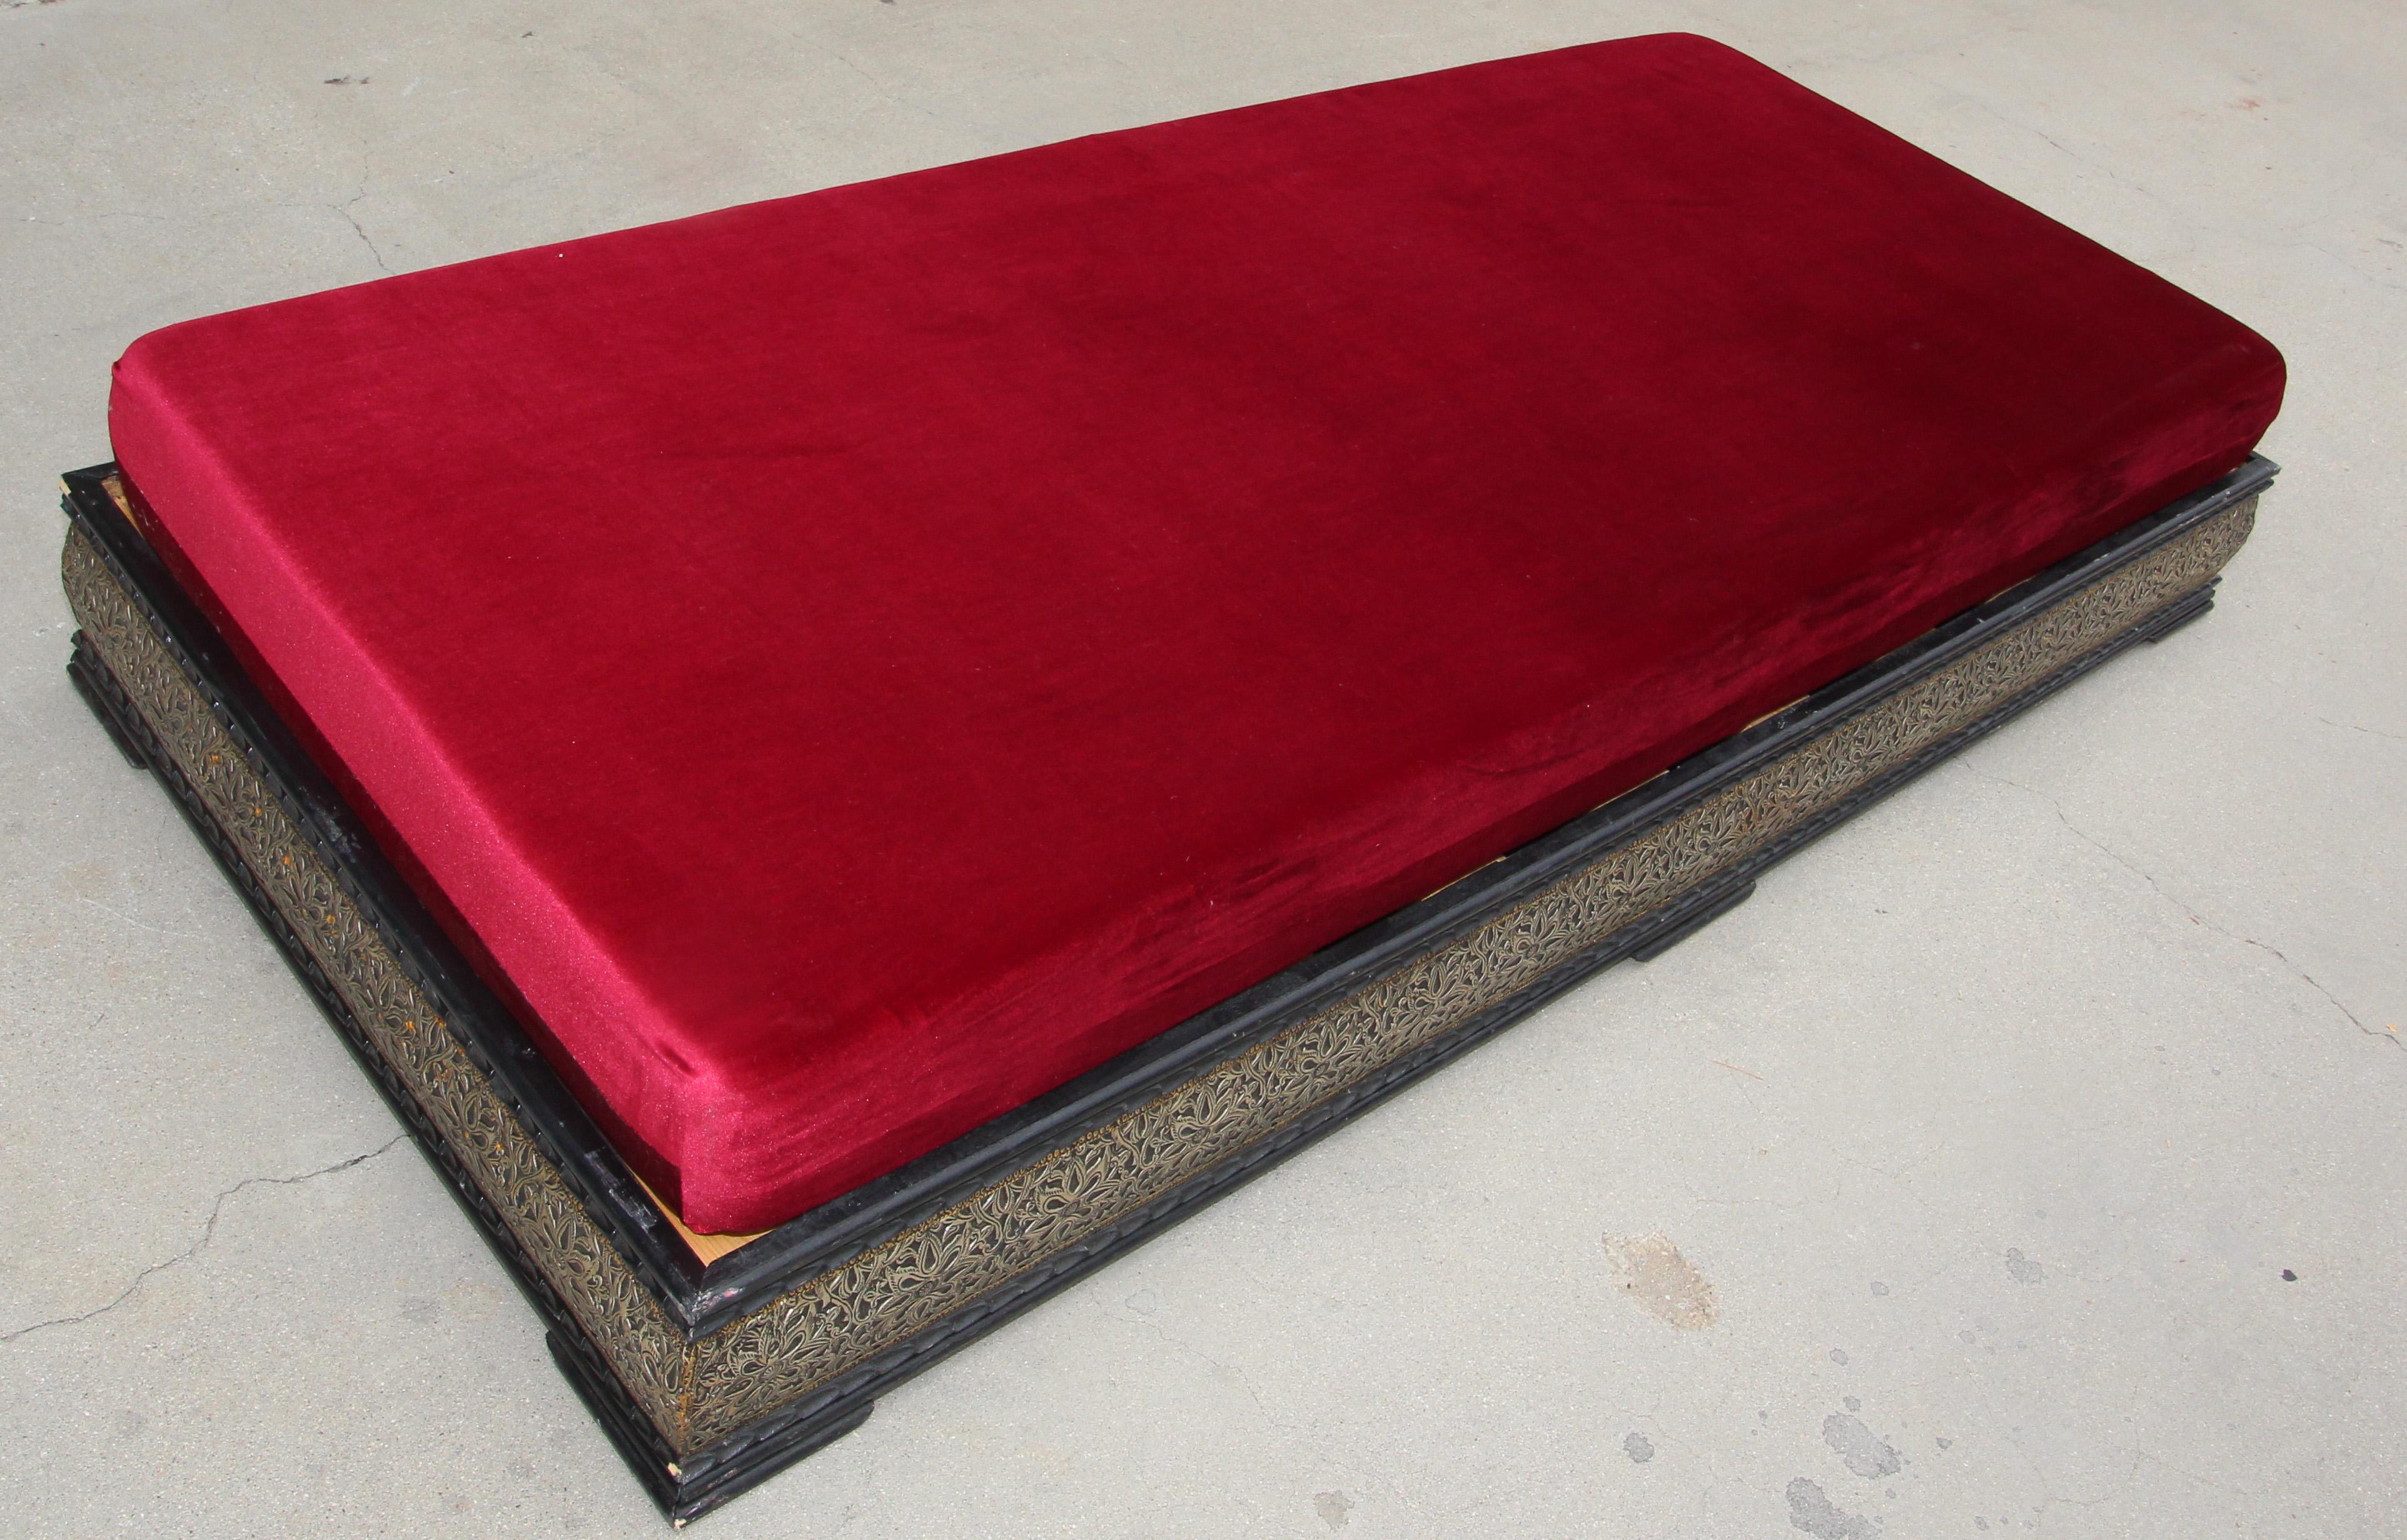 Vintage Moroccan low bench, day bed.
Traditional Moroccan sofa, low bench handcrafted in a wooden base adorned with silvered metal with traditional geometric design, top cushion foam covered with a red velvet fabric.
Moroccan upholstered settee with